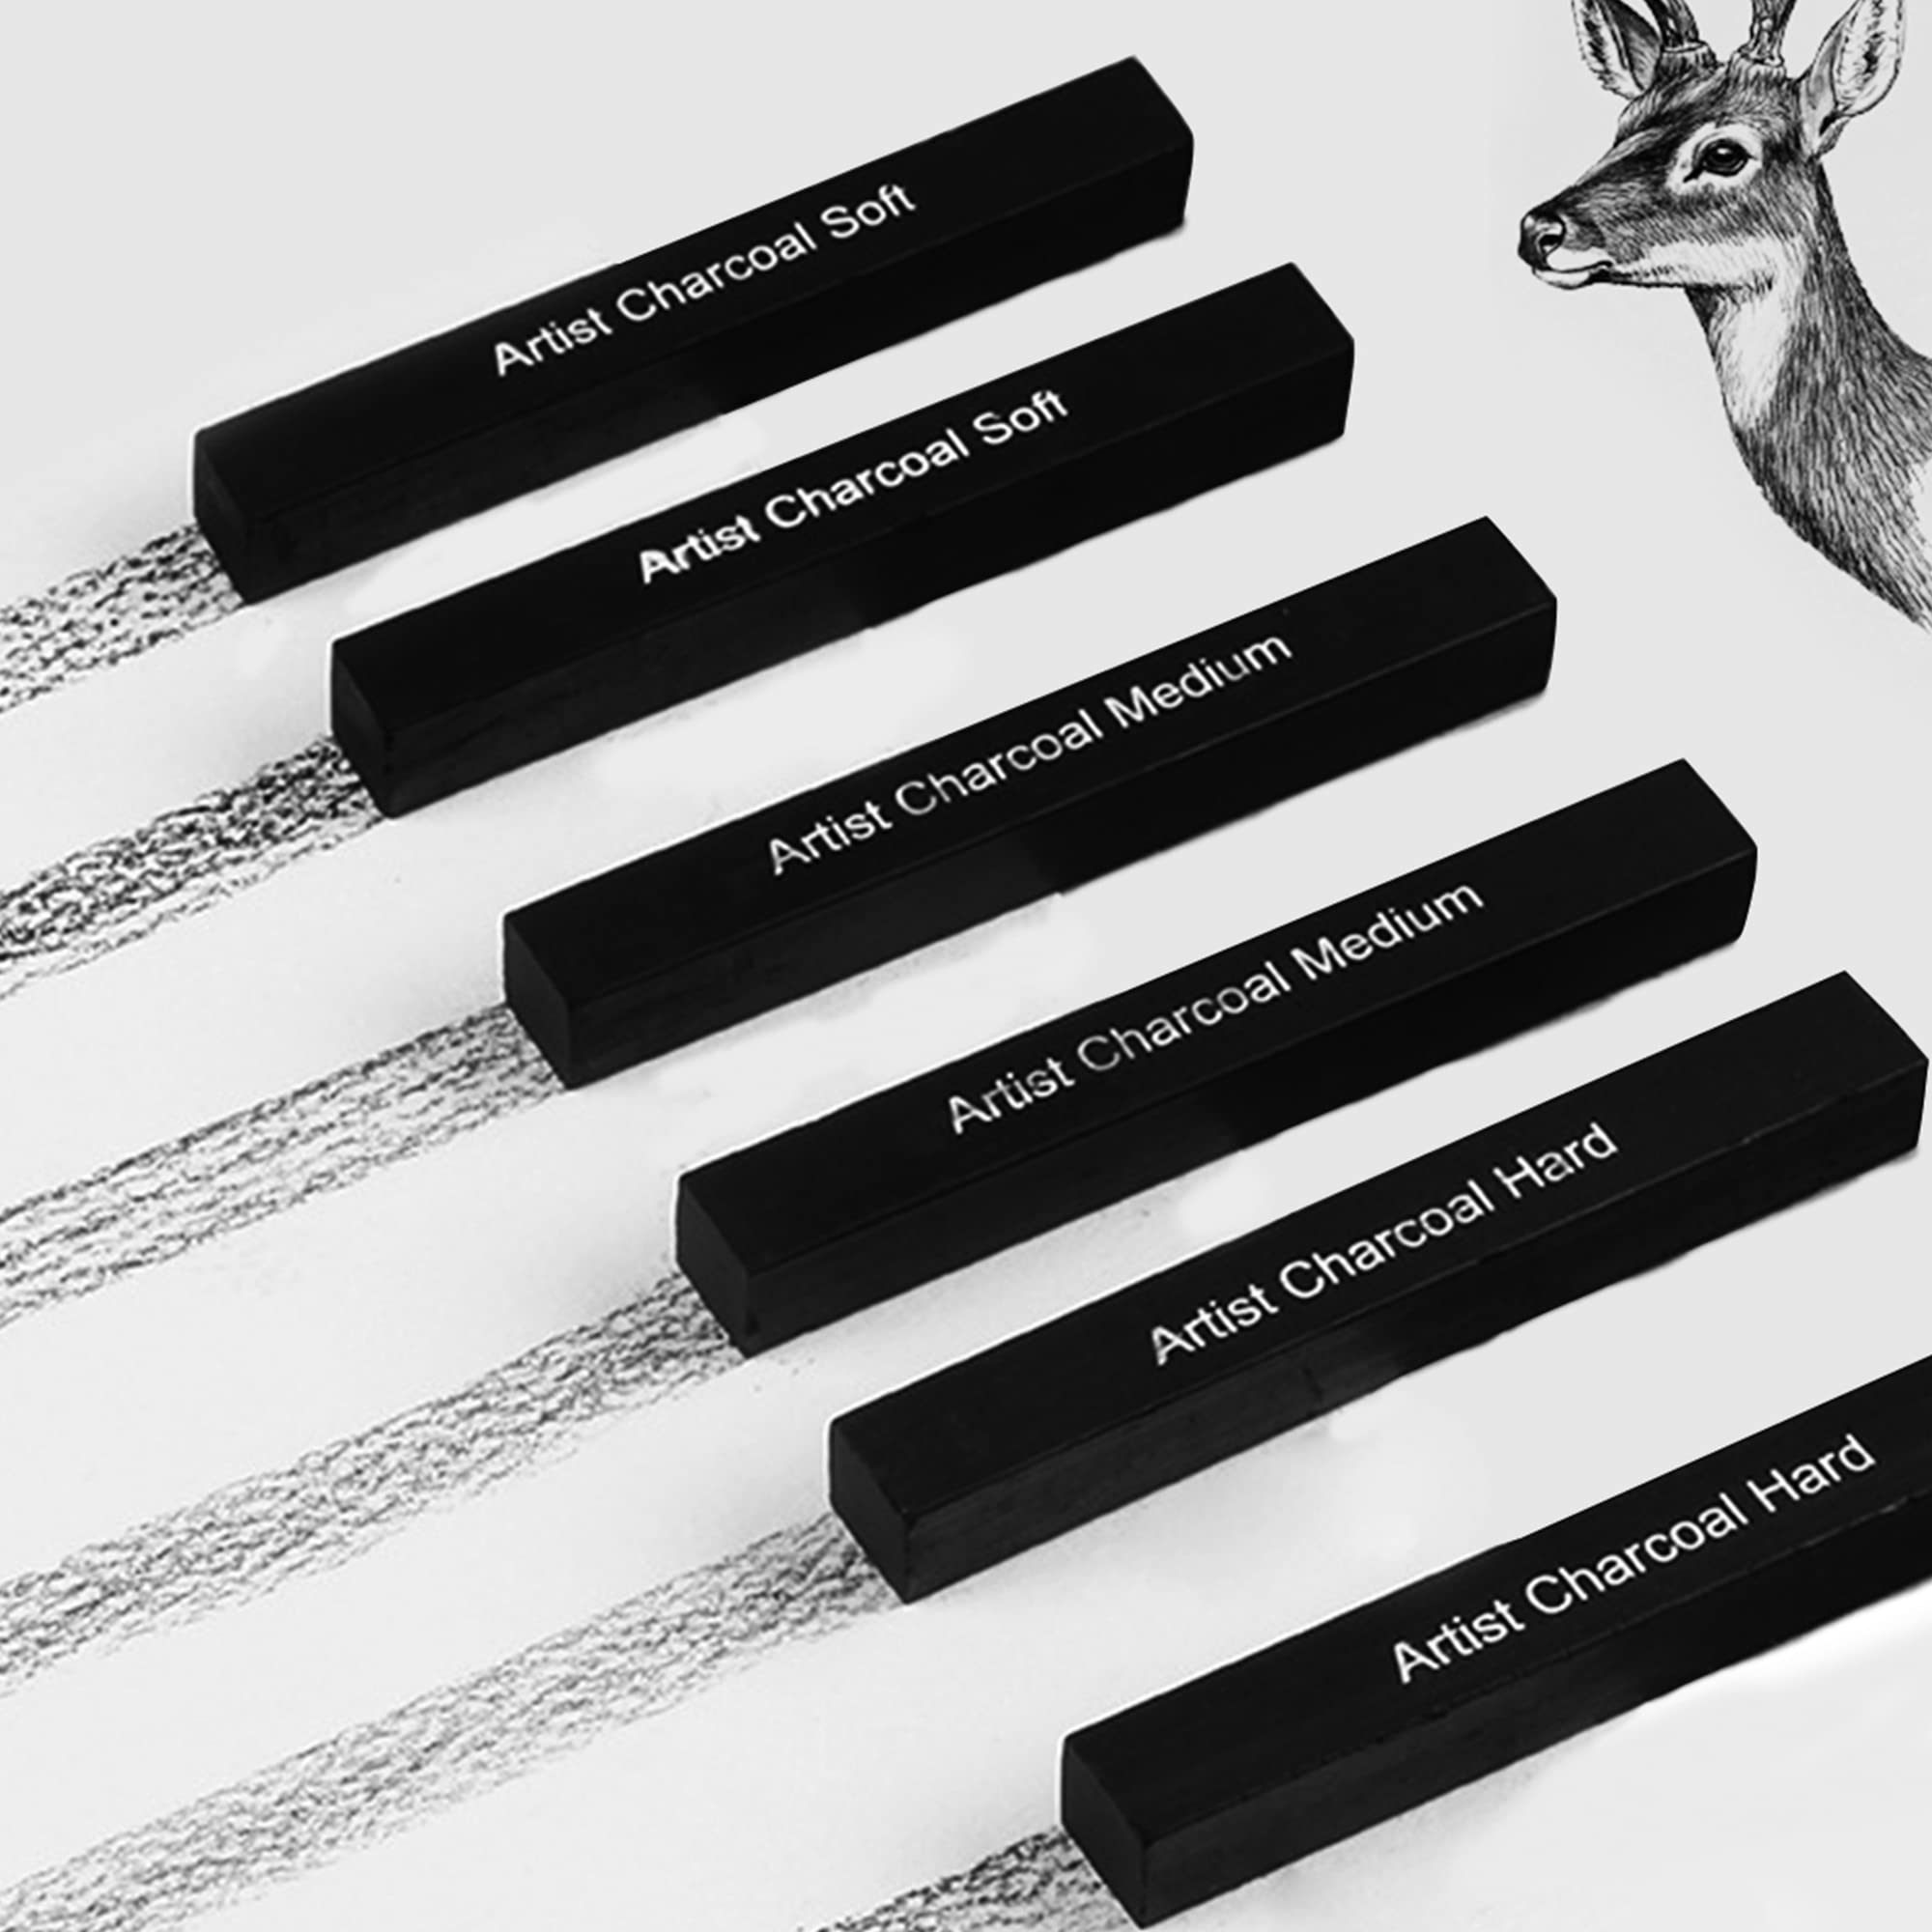 Funity 6pcs Compressed Charcoal Sticks for Drawing, Shading,  2 Soft 2 Medium 2 Hard, Drawing Essential Tools Kit - Compressed chacoal